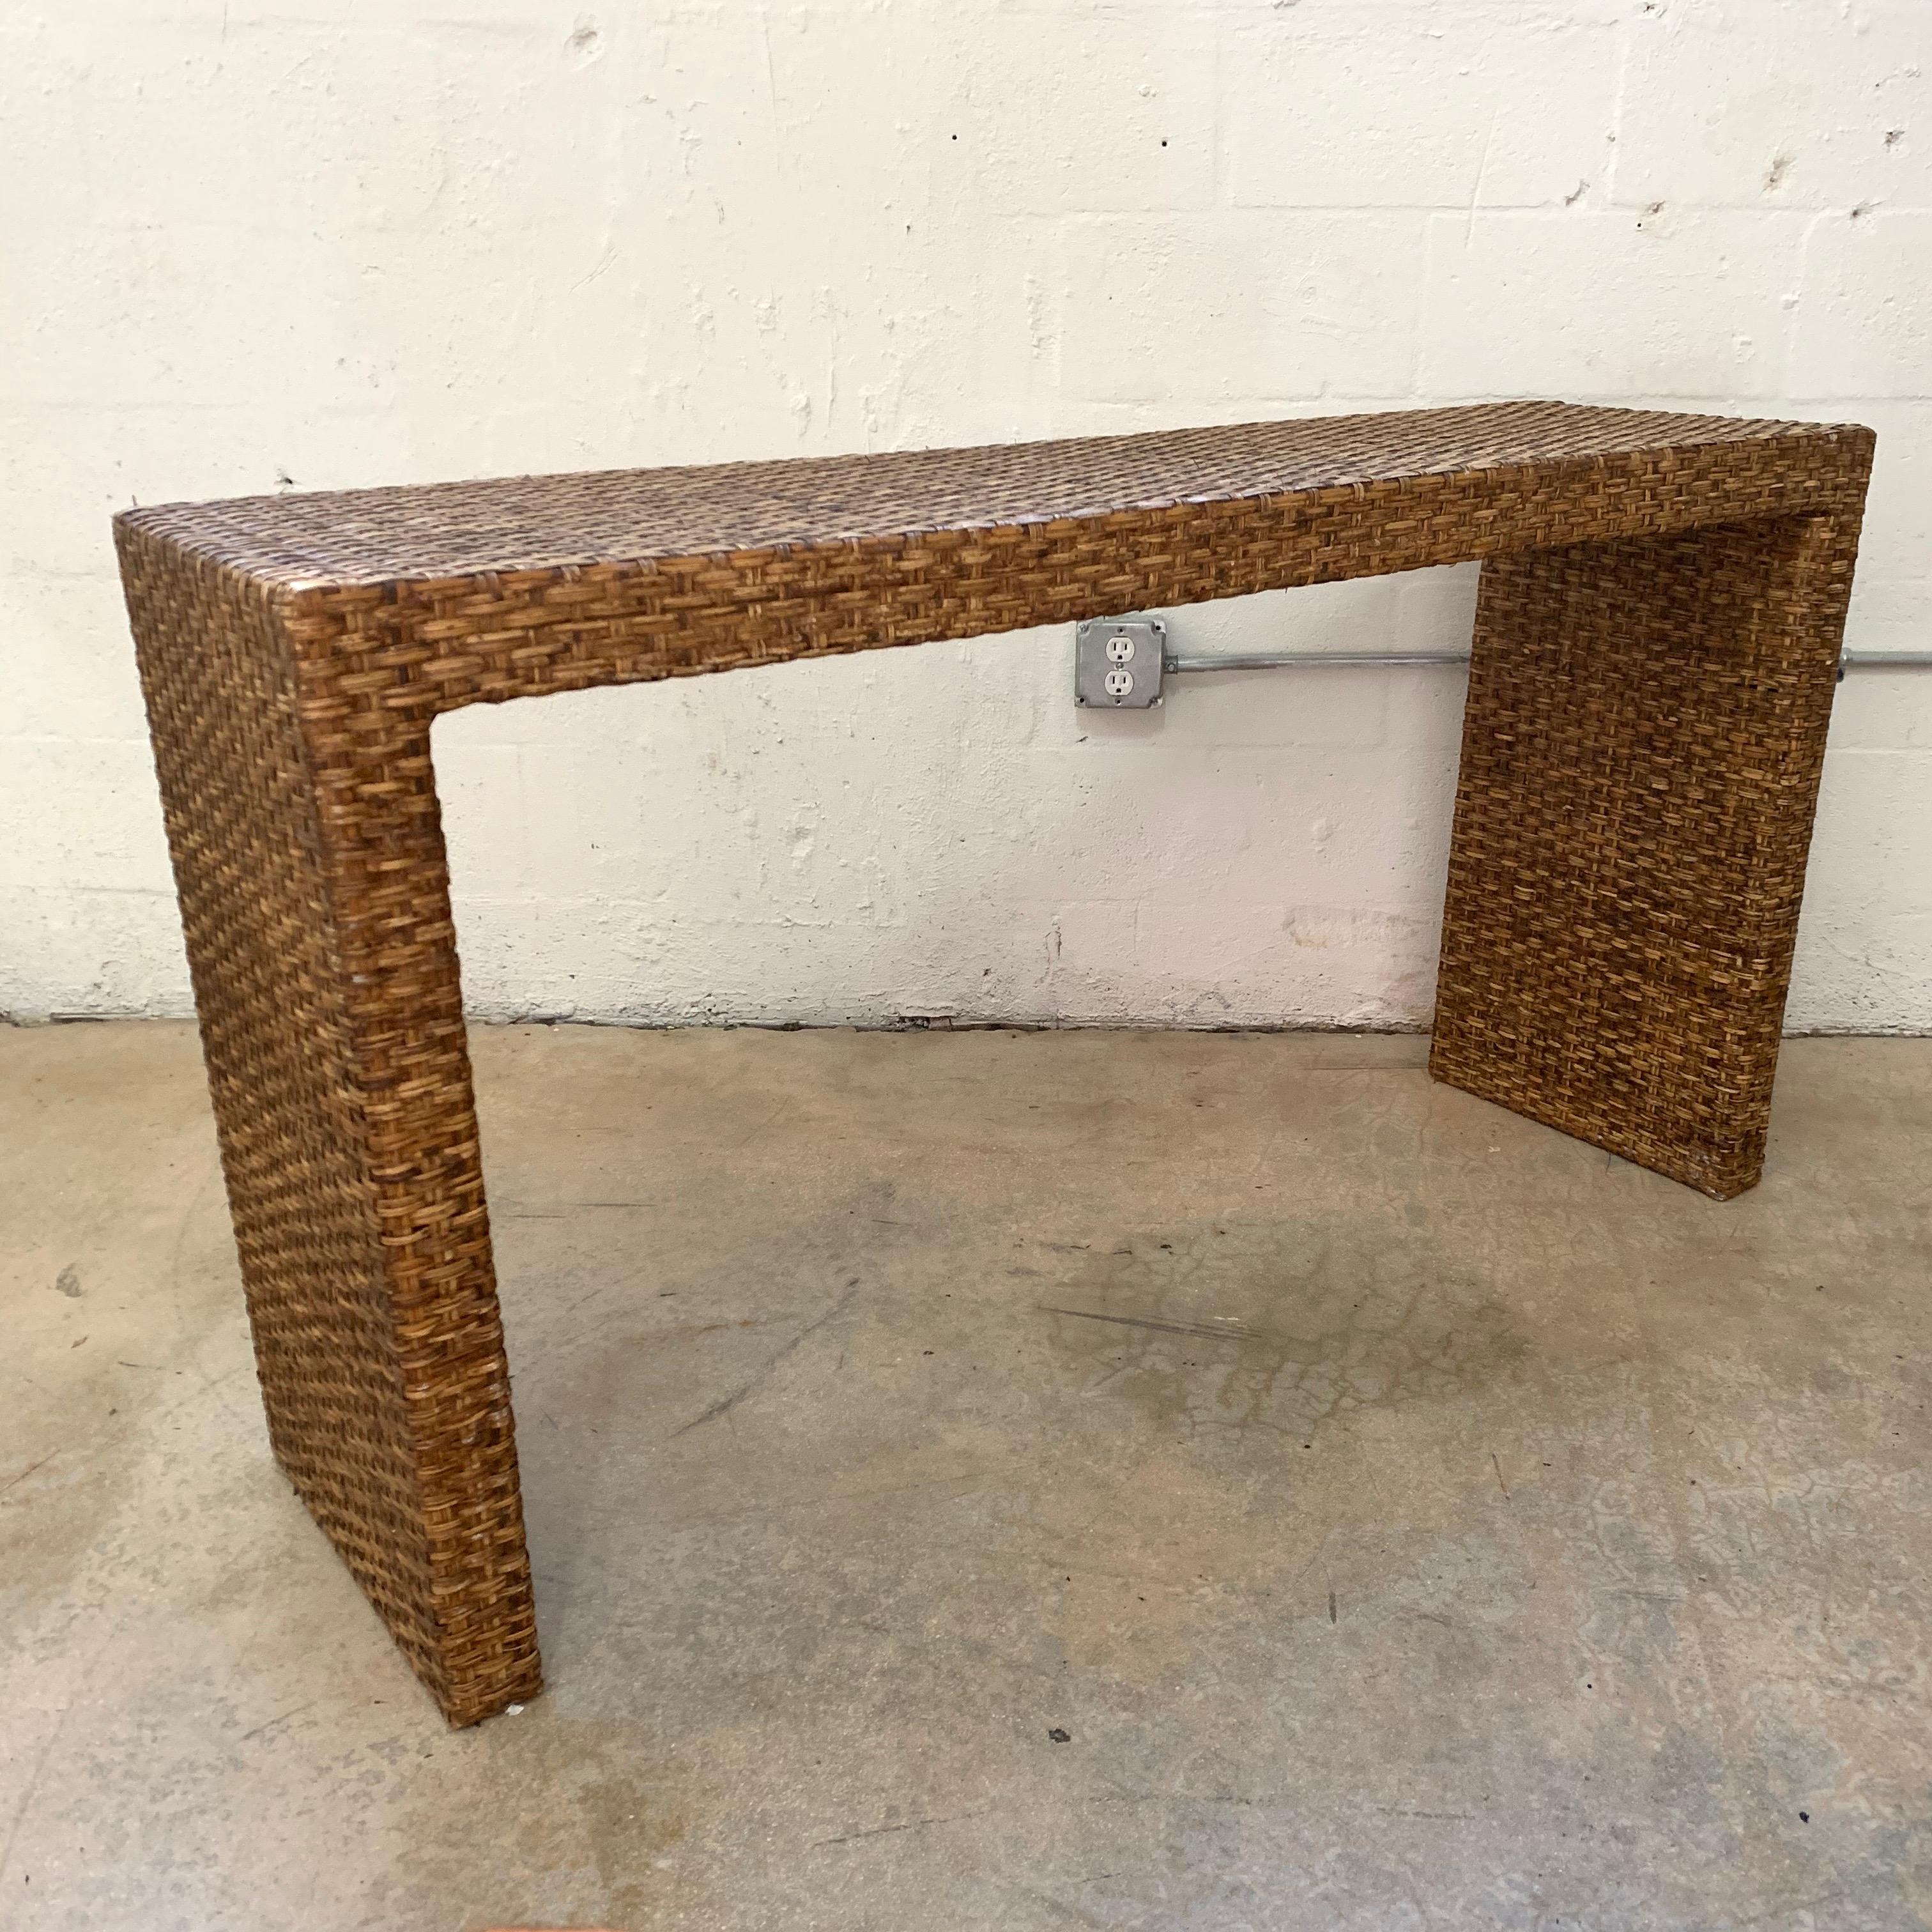 Versatile Parsons design waterfall console rendered in woven wicker finished on all sides, Italy, 1970s.